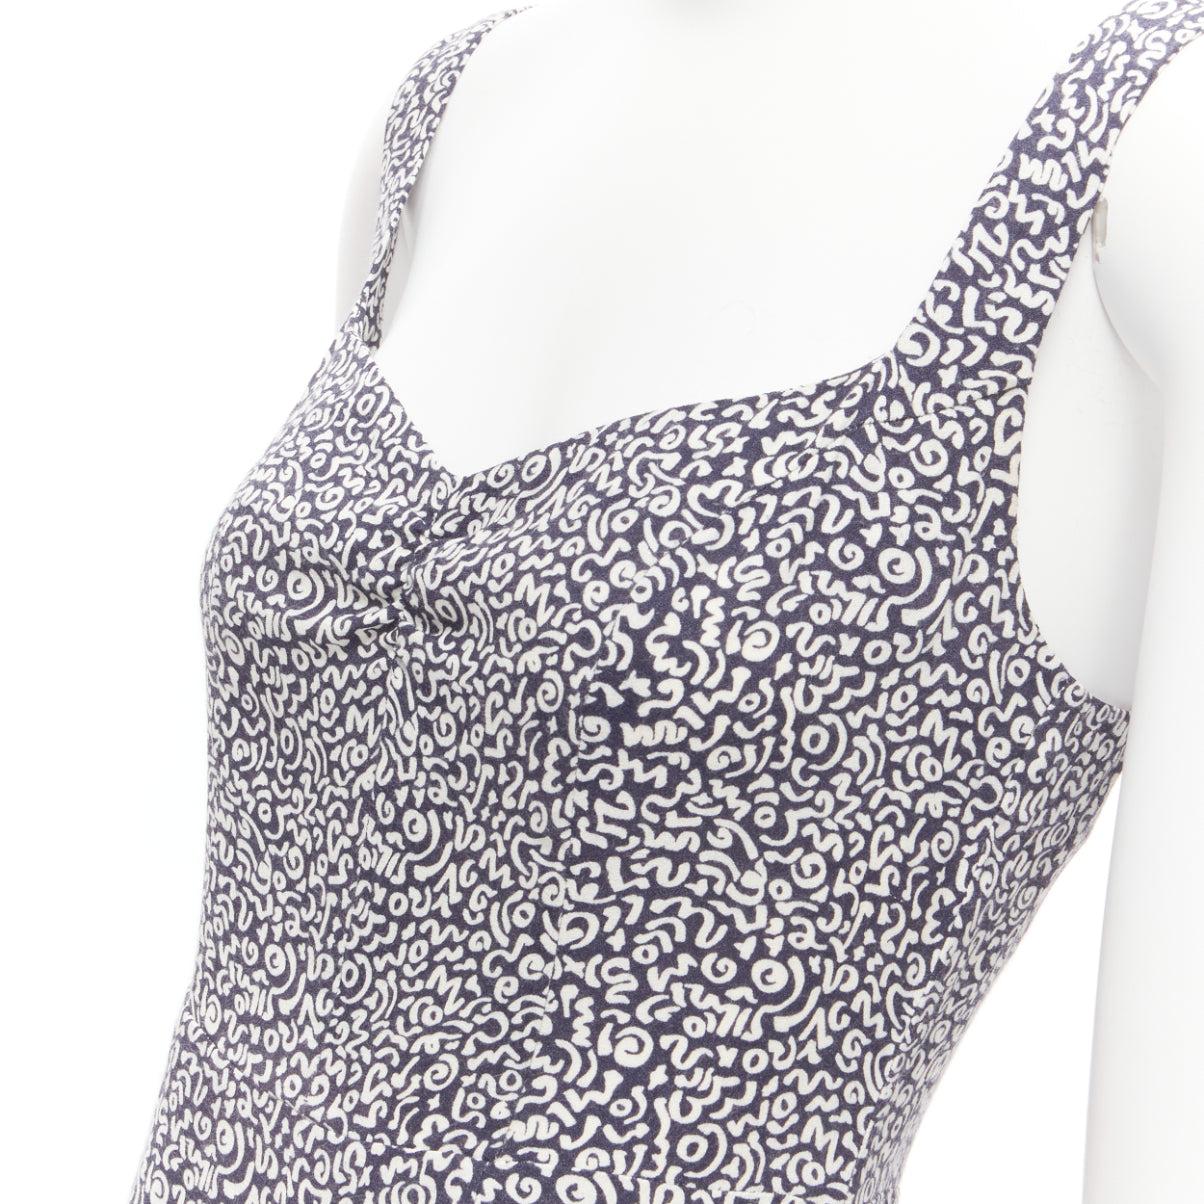 REFORMATION Fairfax navy blue white doodle print sweetheart mini dress US0 XS
Reference: SNKO/A00404
Brand: Reformation
Model: Fairfax
Material: Viscose, Blend
Color: White, Navy
Pattern: Graffiti
Closure: Zip
Extra Details: Sunny-day meetups get